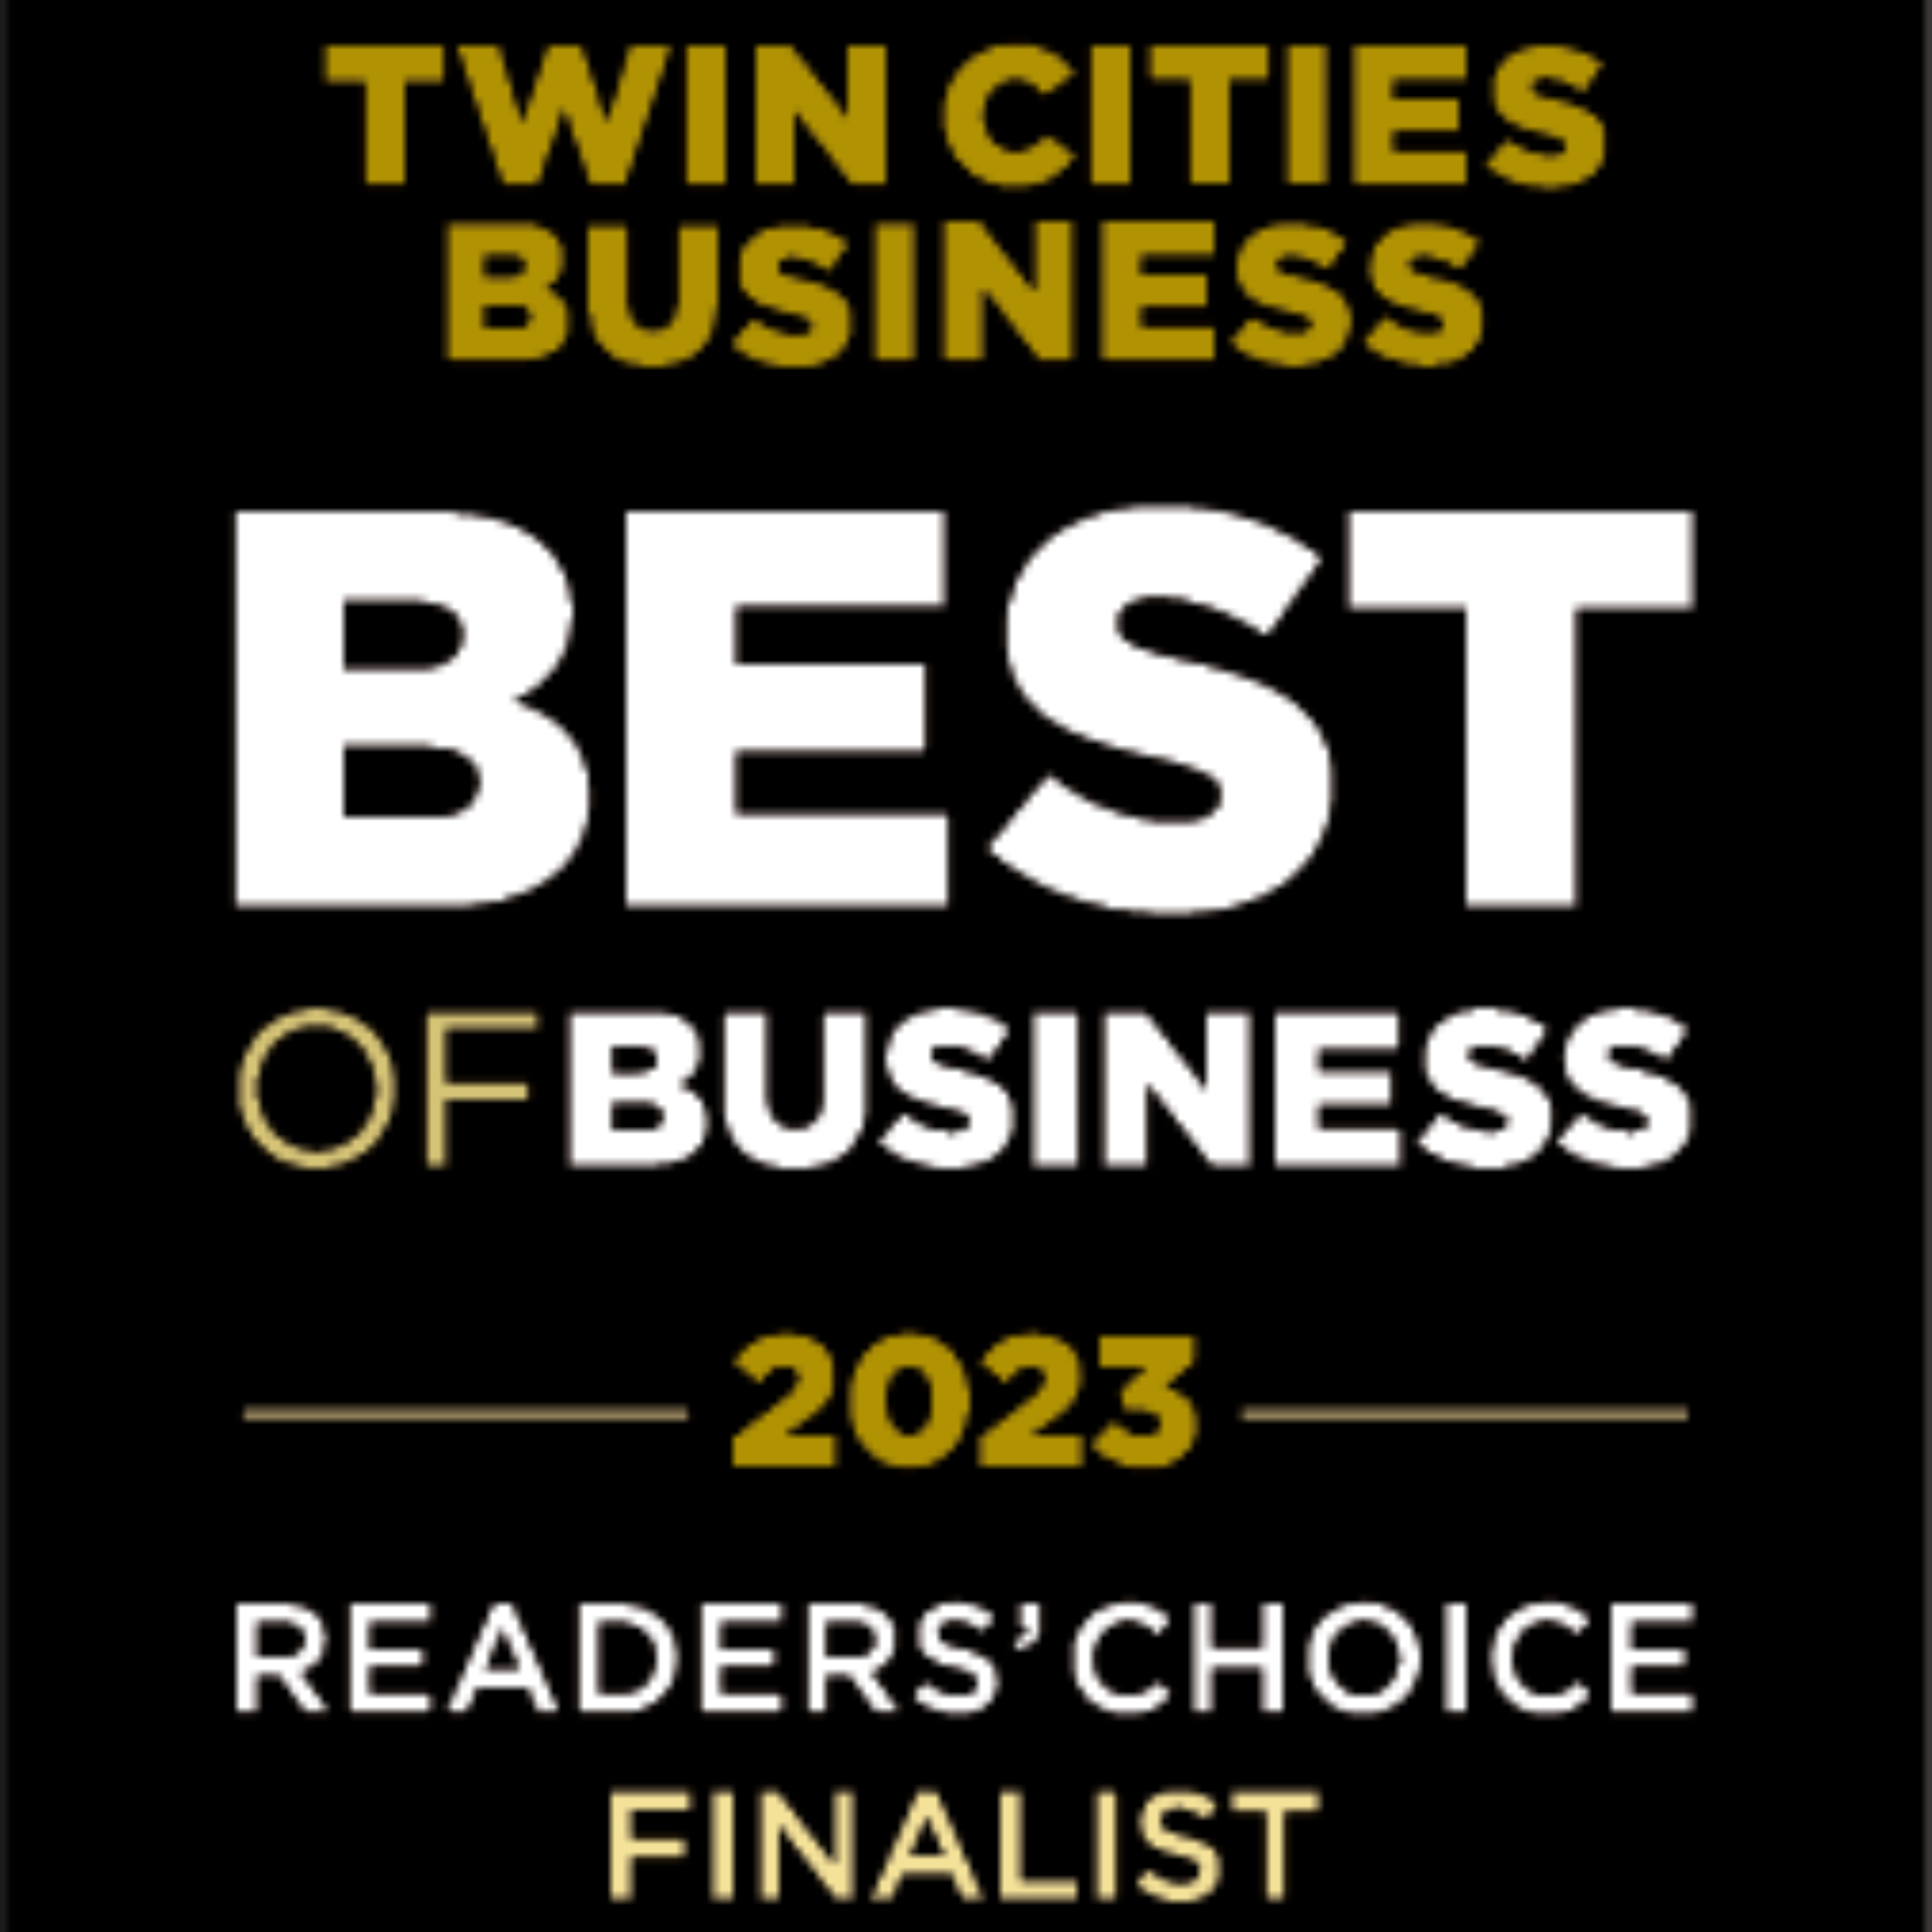 Twin Cities Business Names Marco a 2023 Best of Business Company